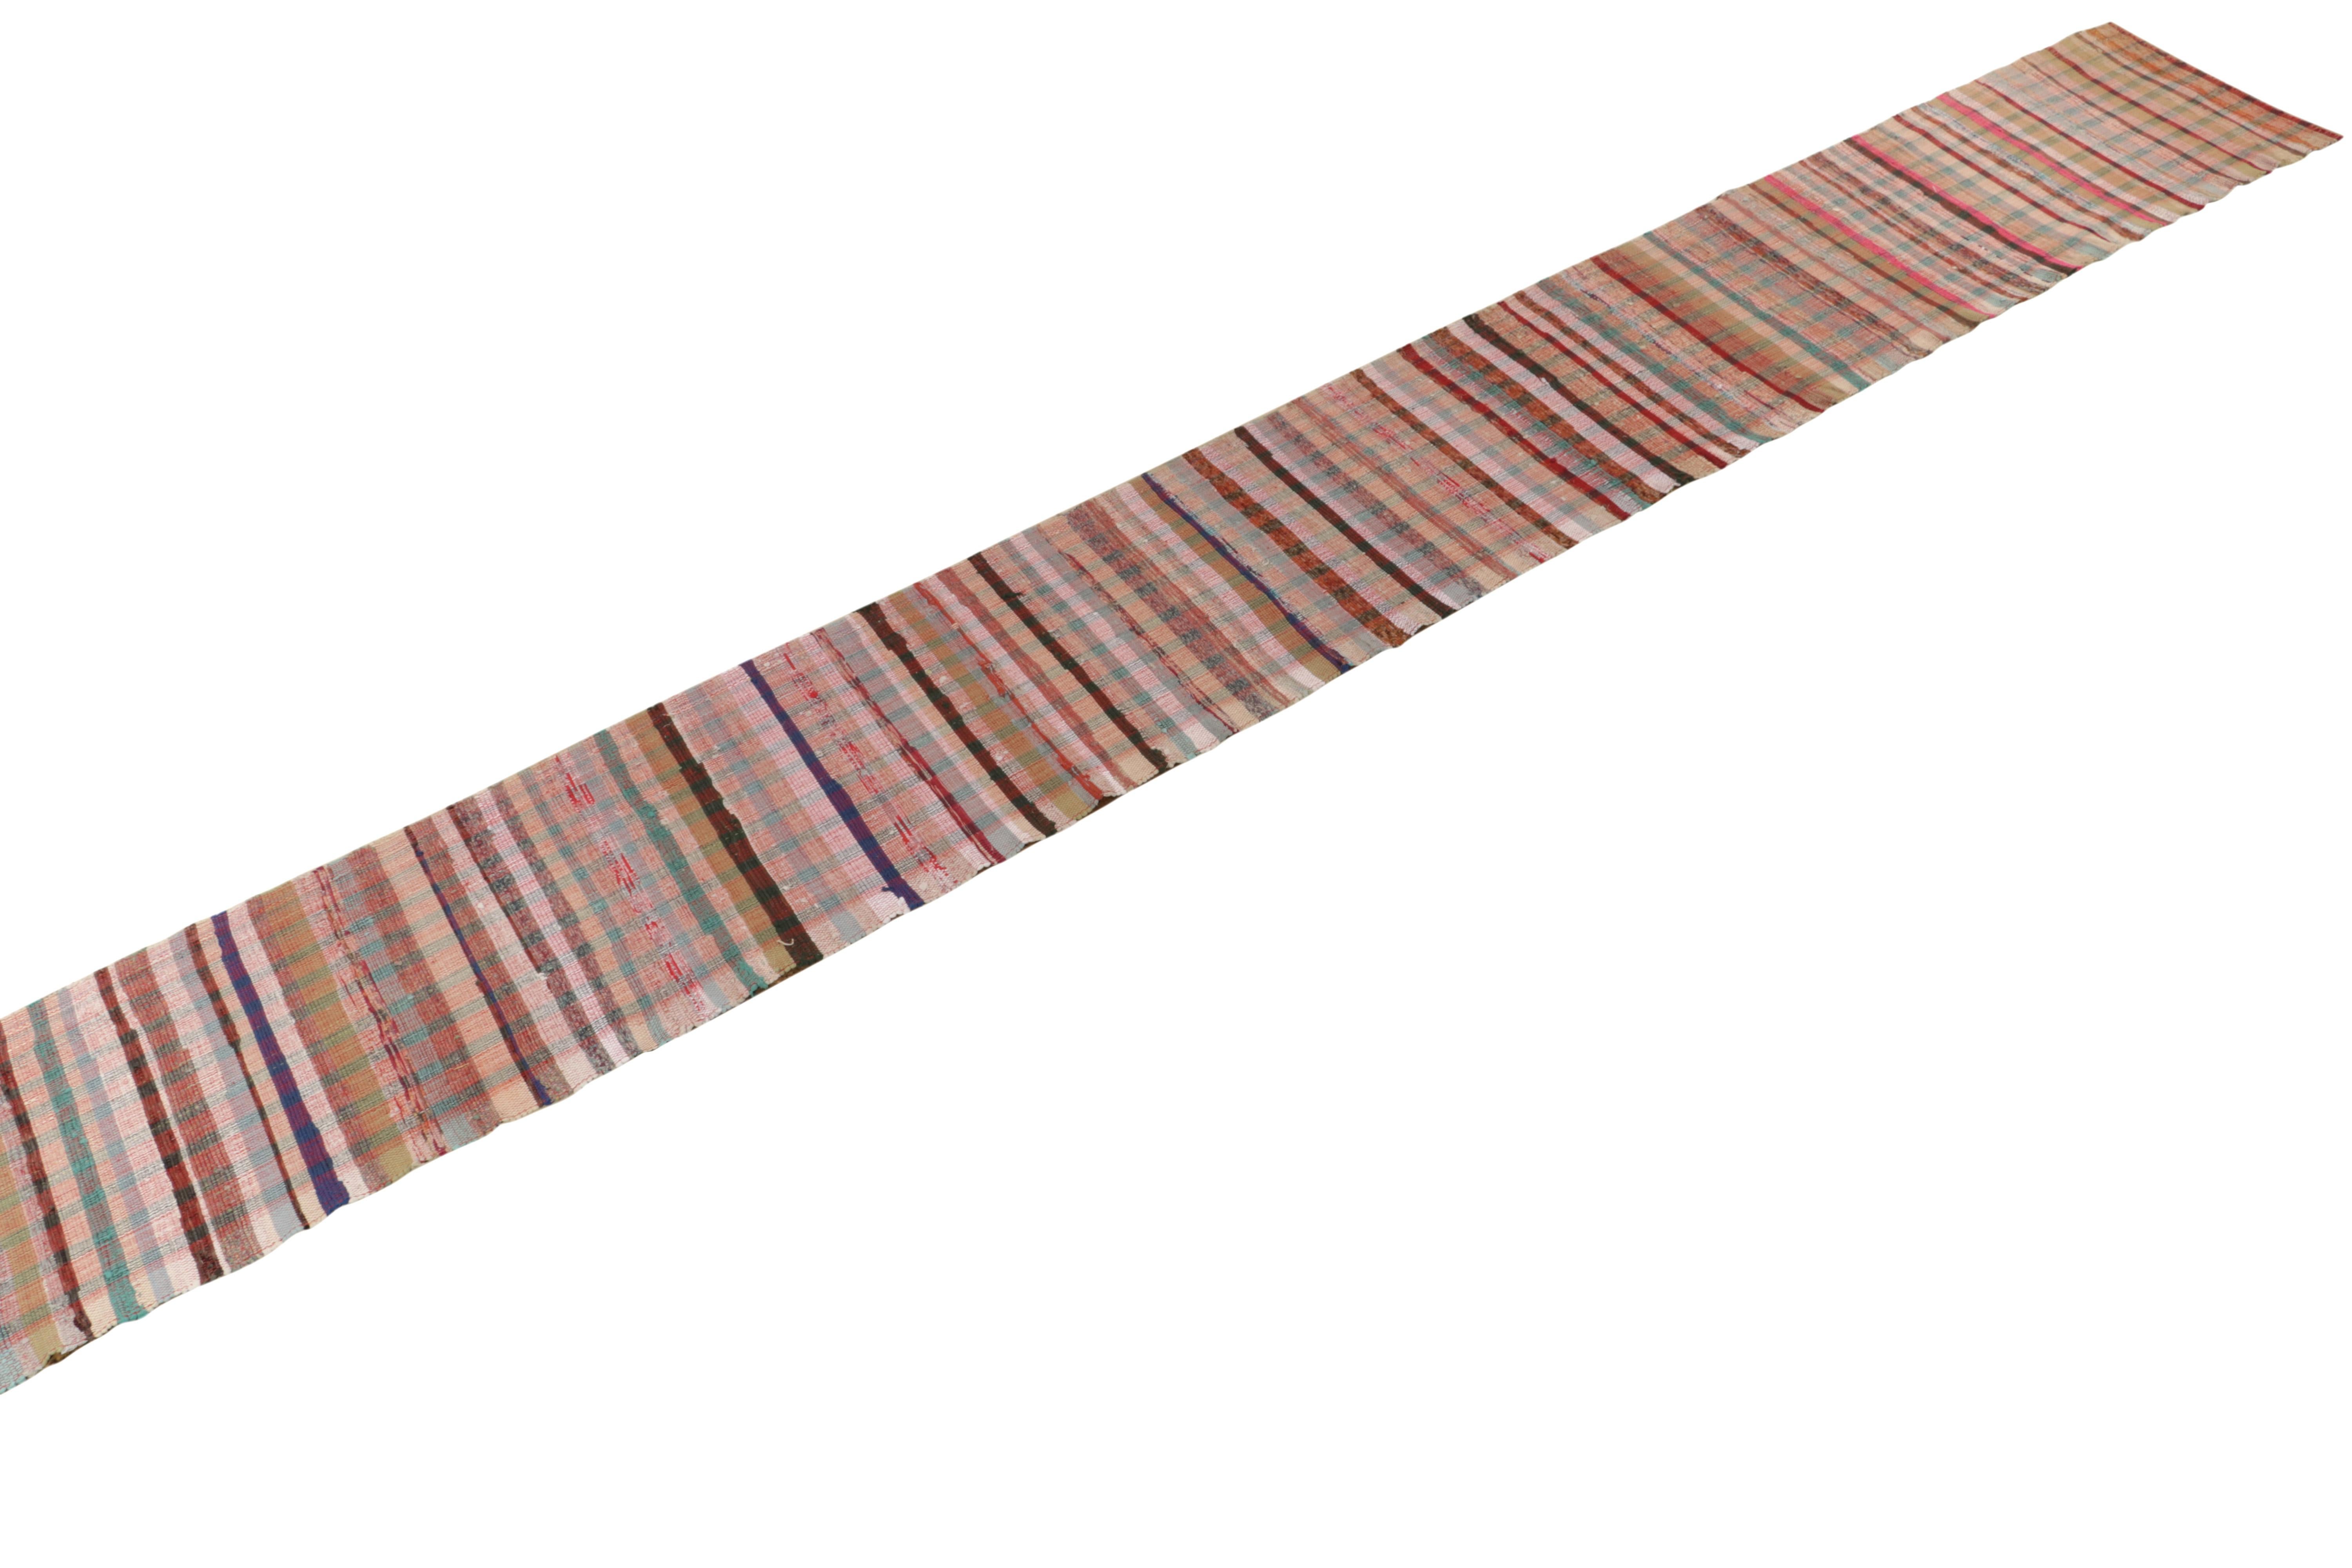 Turkish Rug & Kilim’s Oversized Flat Weave Runner in Pink & Colorful Plaid Pattern For Sale